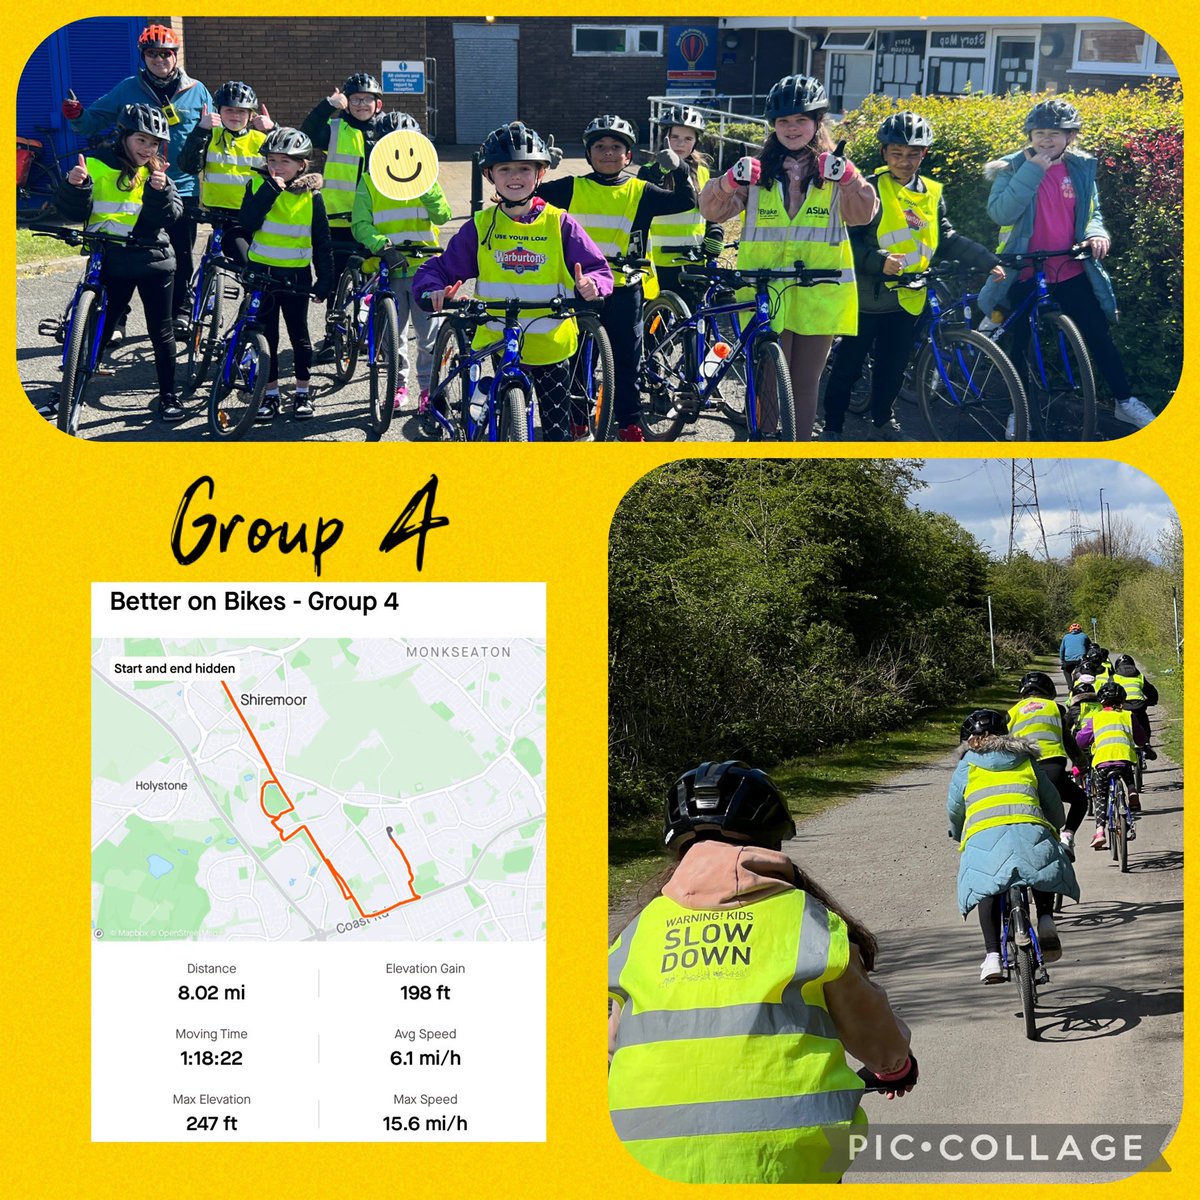 @NYPSYr5Meerkats @NypsYr5bPumas Warming up for Group 4 in the afternoon as we headed through the Cobalt up to Shiremoor. It’s lovely getting our cycle legs back with #BetterOnBikes. @Newyorkprimary